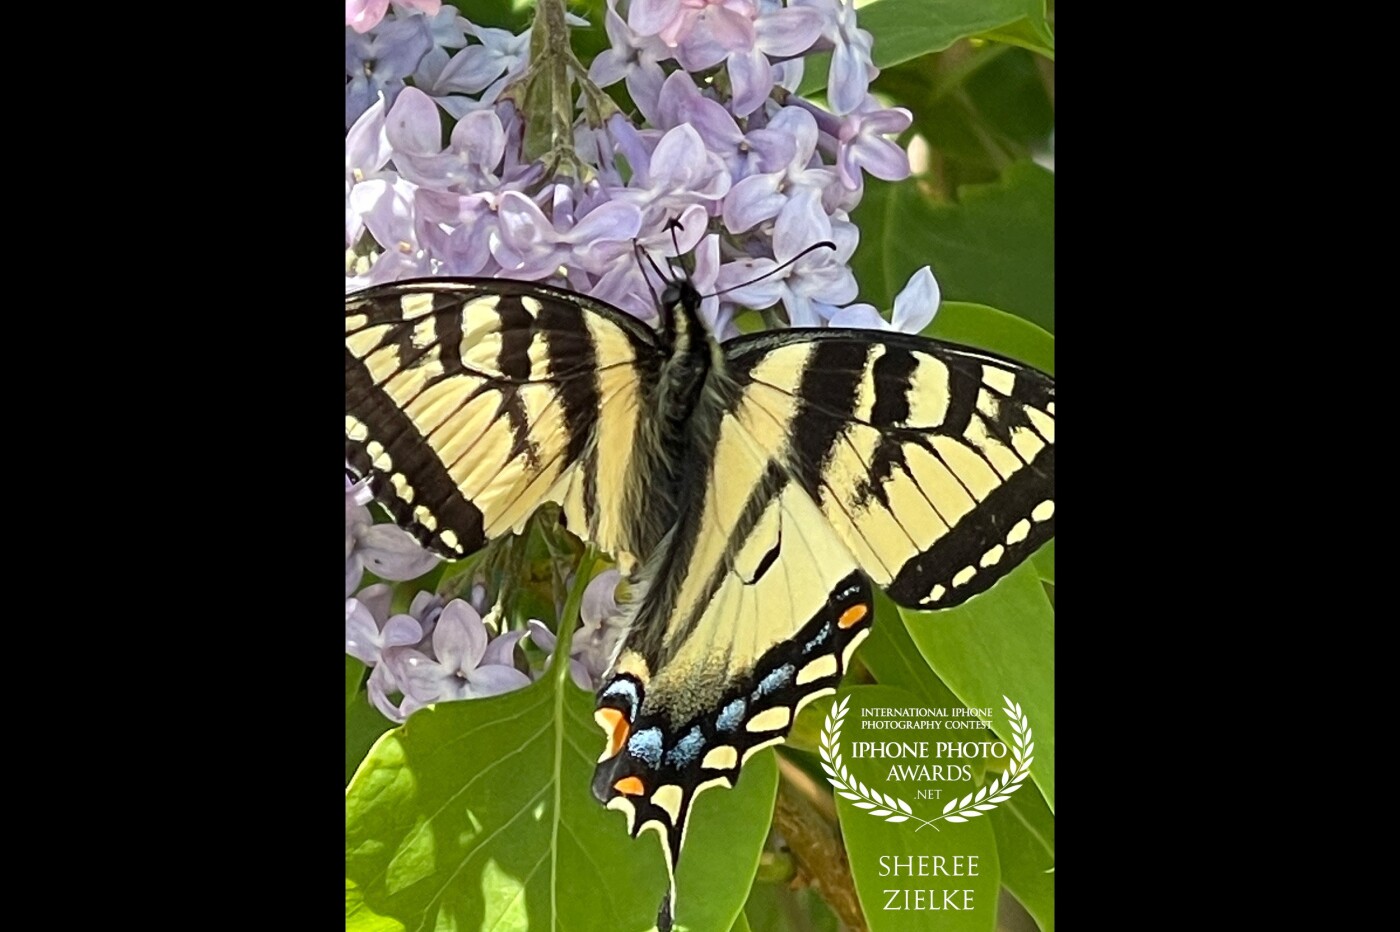 Oh, my “broken beauty!” This Tiger Swallowtail butterfly, even though seemingly disabled, was going about its business gathering lilac nectar with nary a hint of a problem.